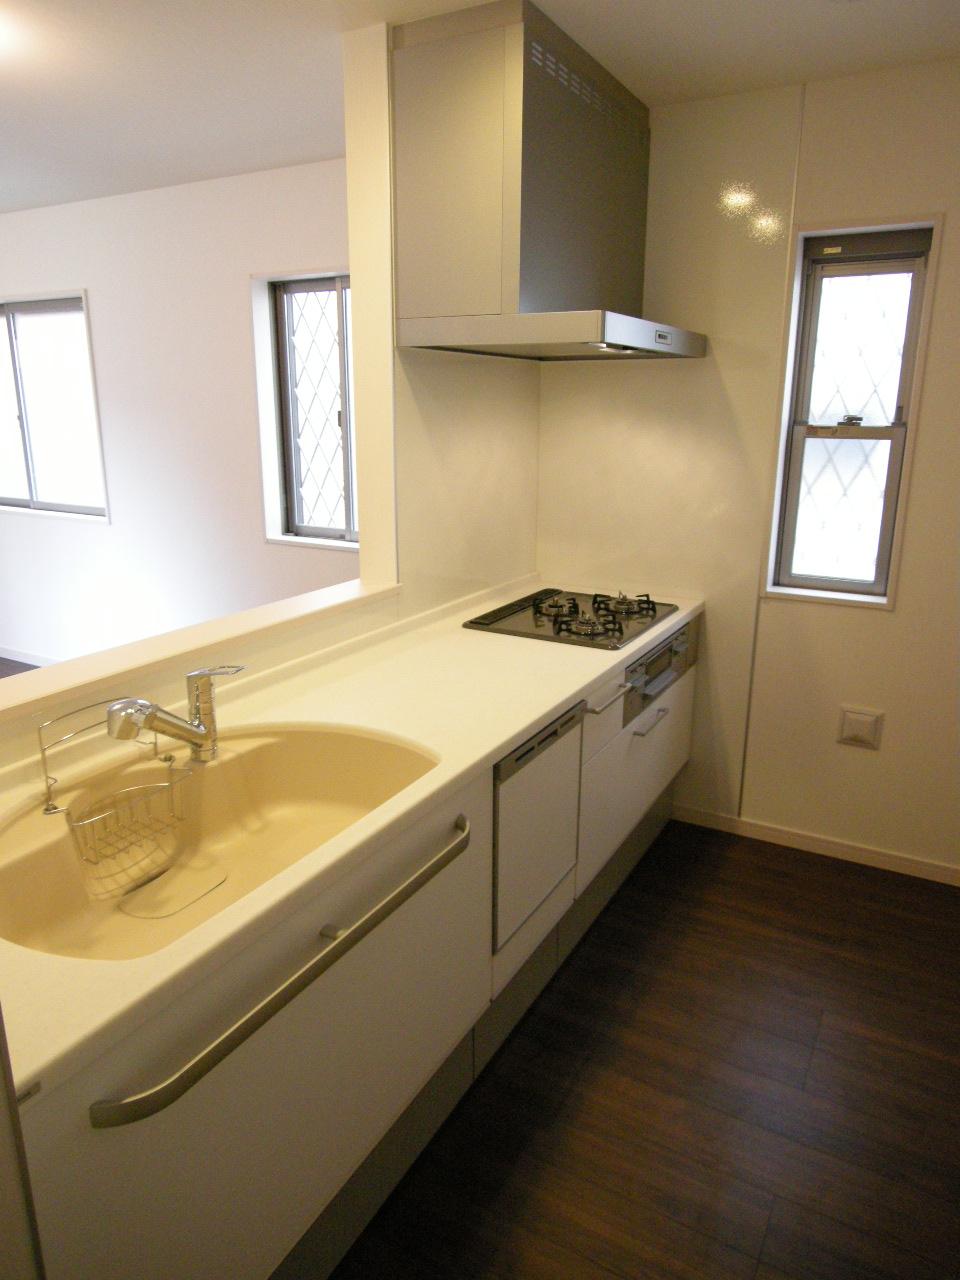 Same specifications photo (kitchen). (6 Building) same specification